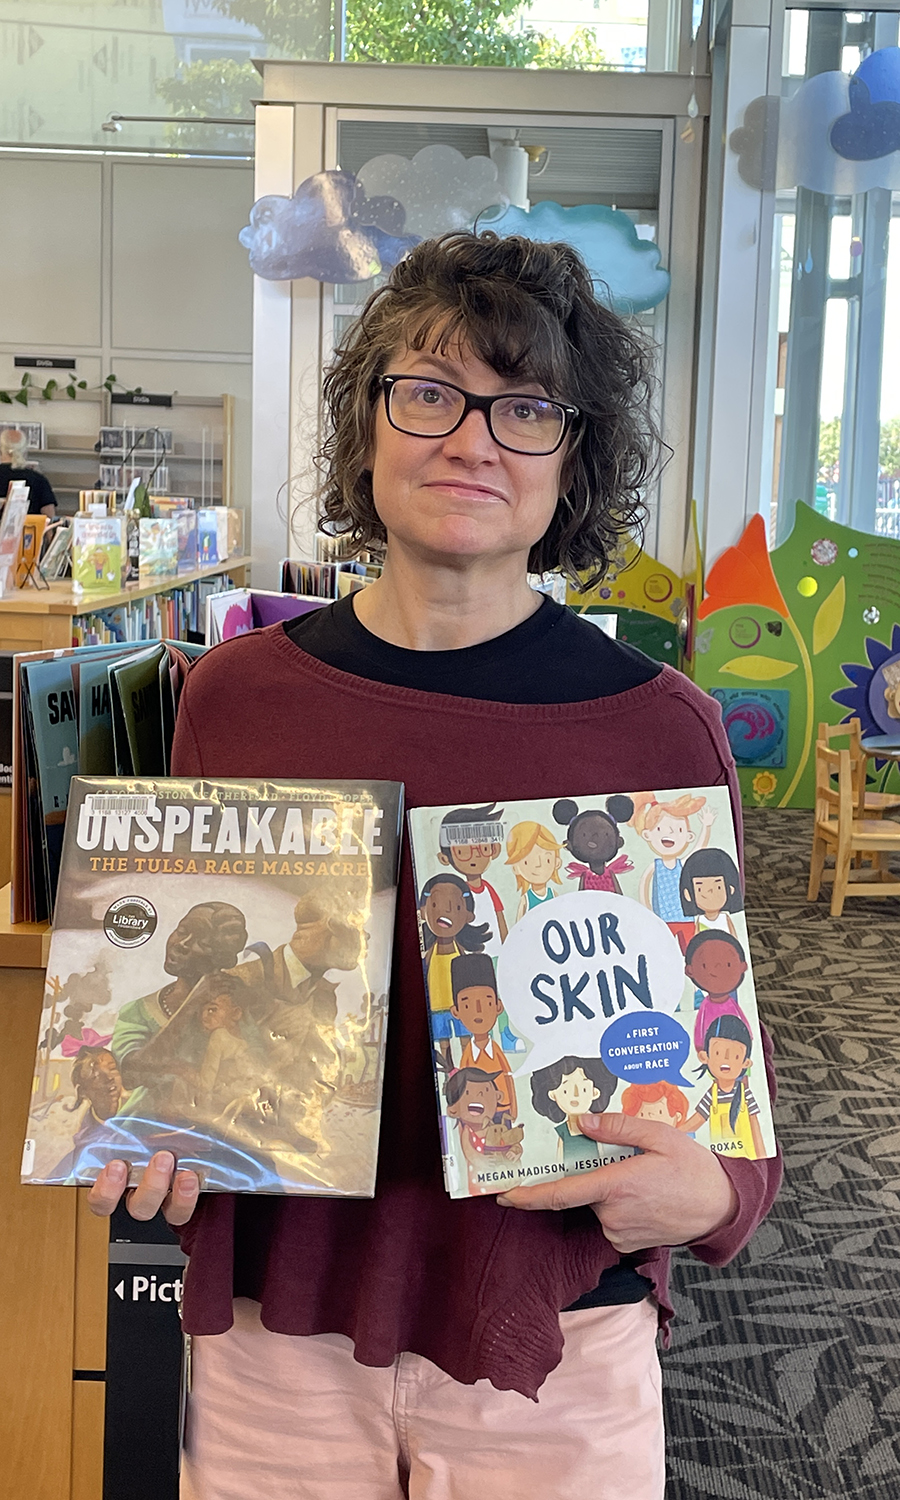 A librarian holds up the children's books "our skin" and "unspeakable" inside the Woodstock library.